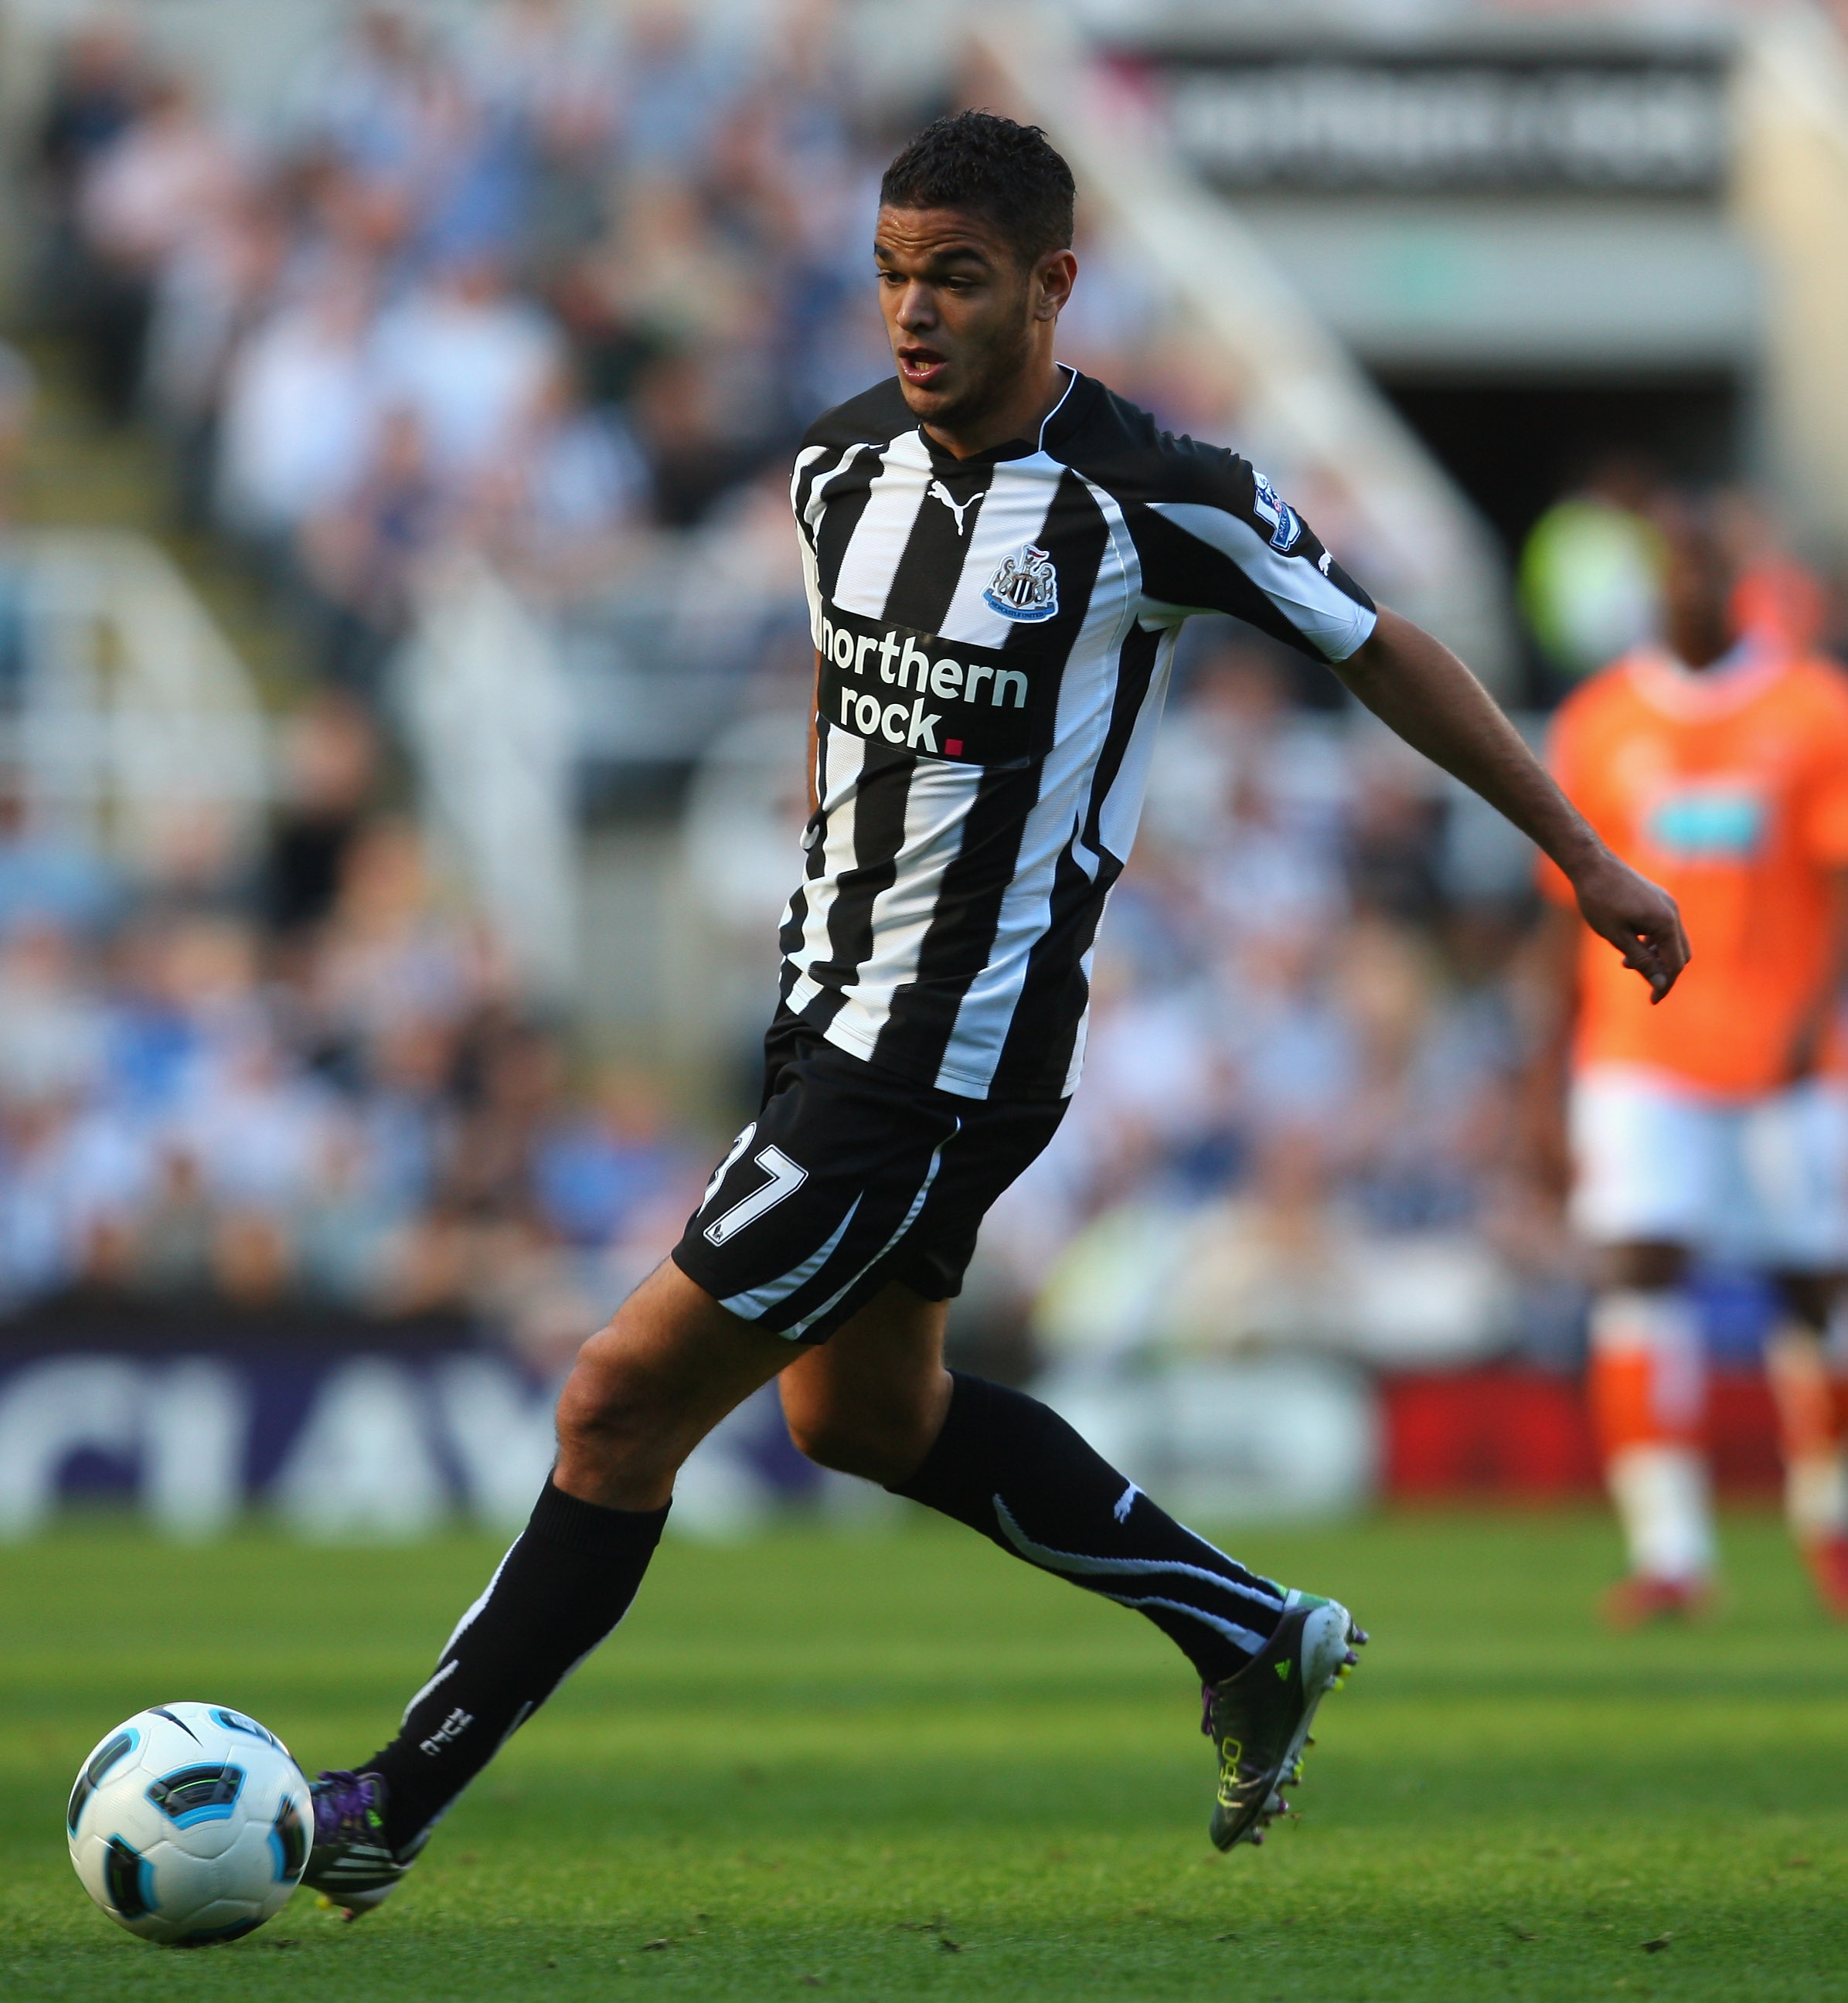 NEWCASTLE UPON TYNE, ENGLAND - SEPTEMBER 11:  Newcastle forward Hatem Ben Arfa in action during the Barclays Premier League match between Newcastle United and Blackpool at St James' Park on September 11, 2010 in Newcastle upon Tyne, England.  (Photo by St